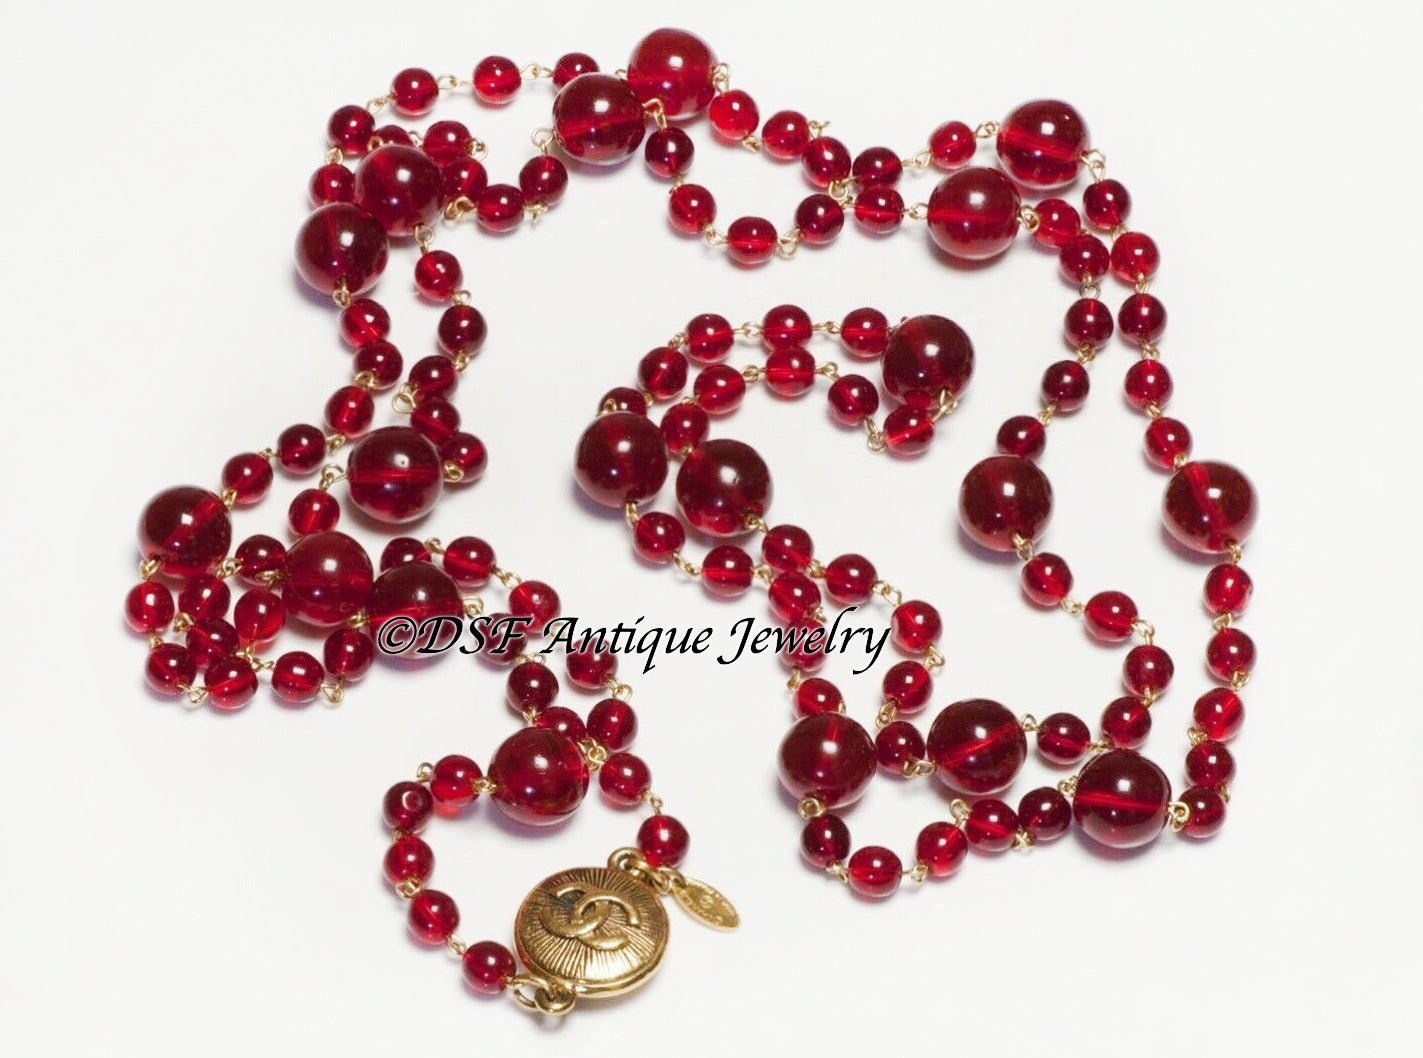 CHANEL Paris 1990’s Red Poured Glass Beads Sautoir Chain Necklace